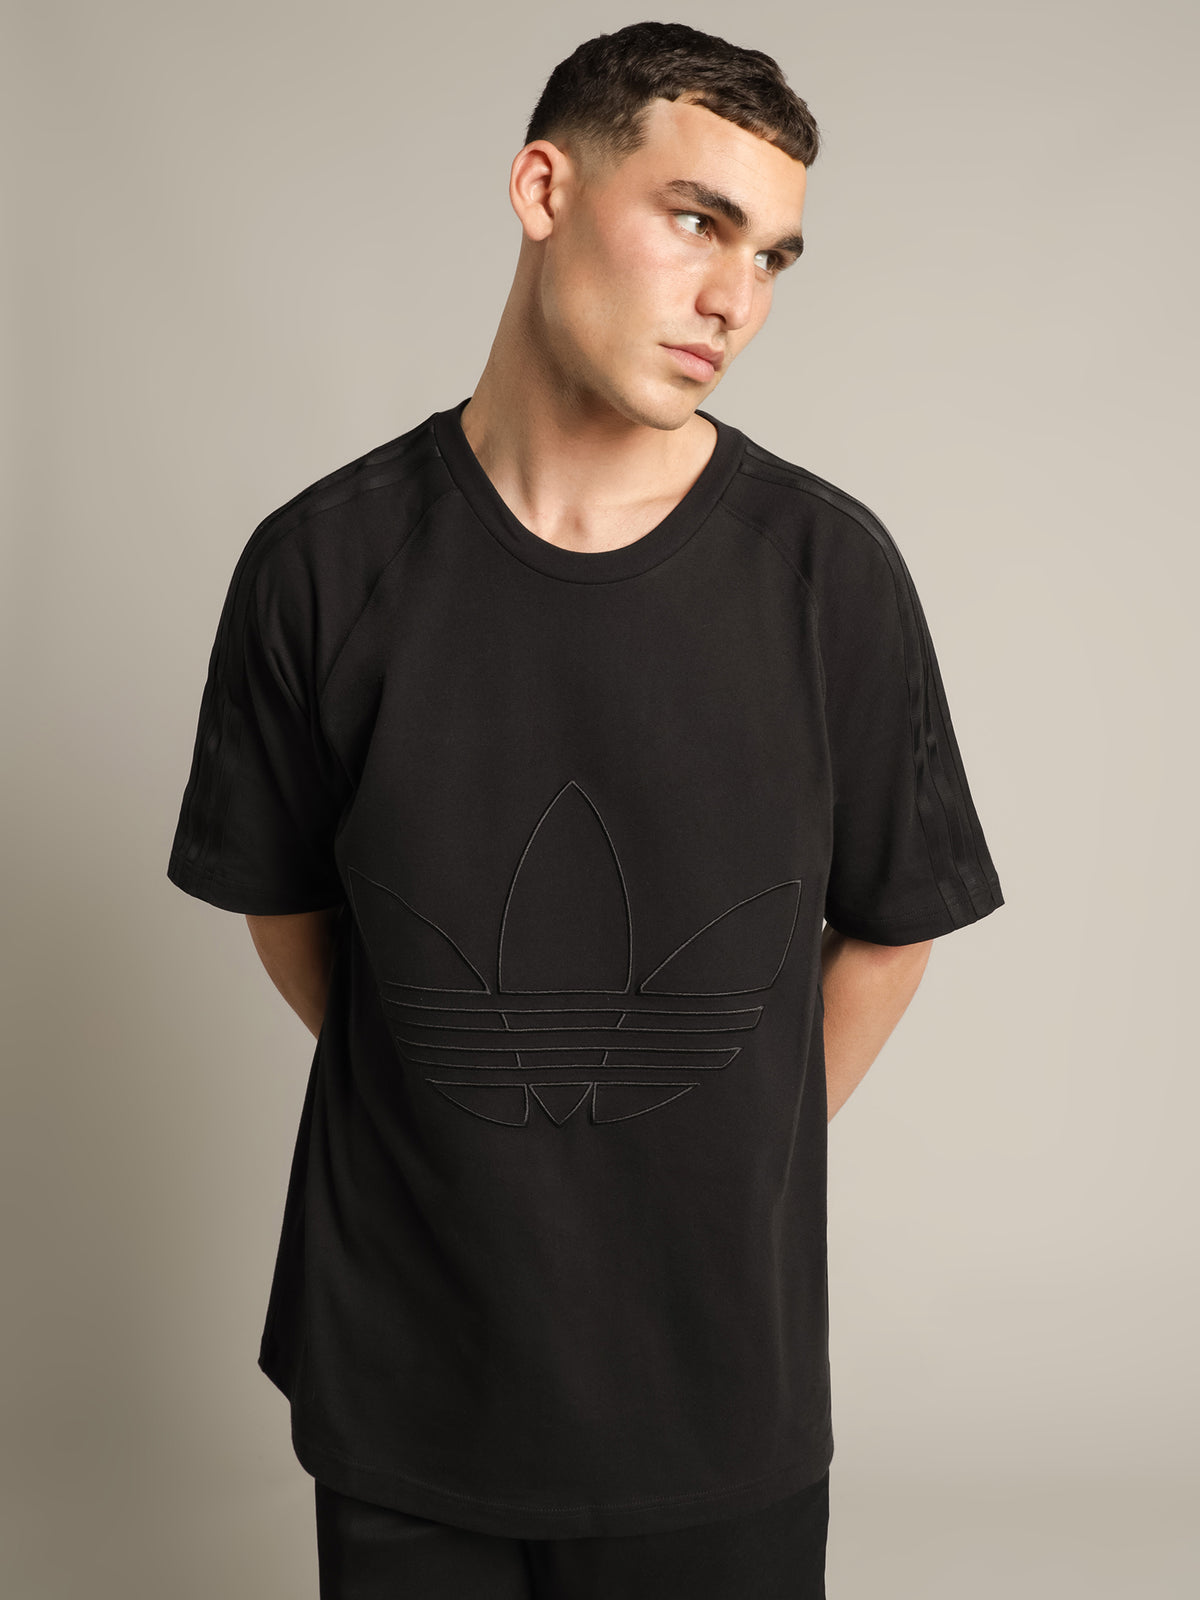 Graphics Tricolor T-Shirt in Black